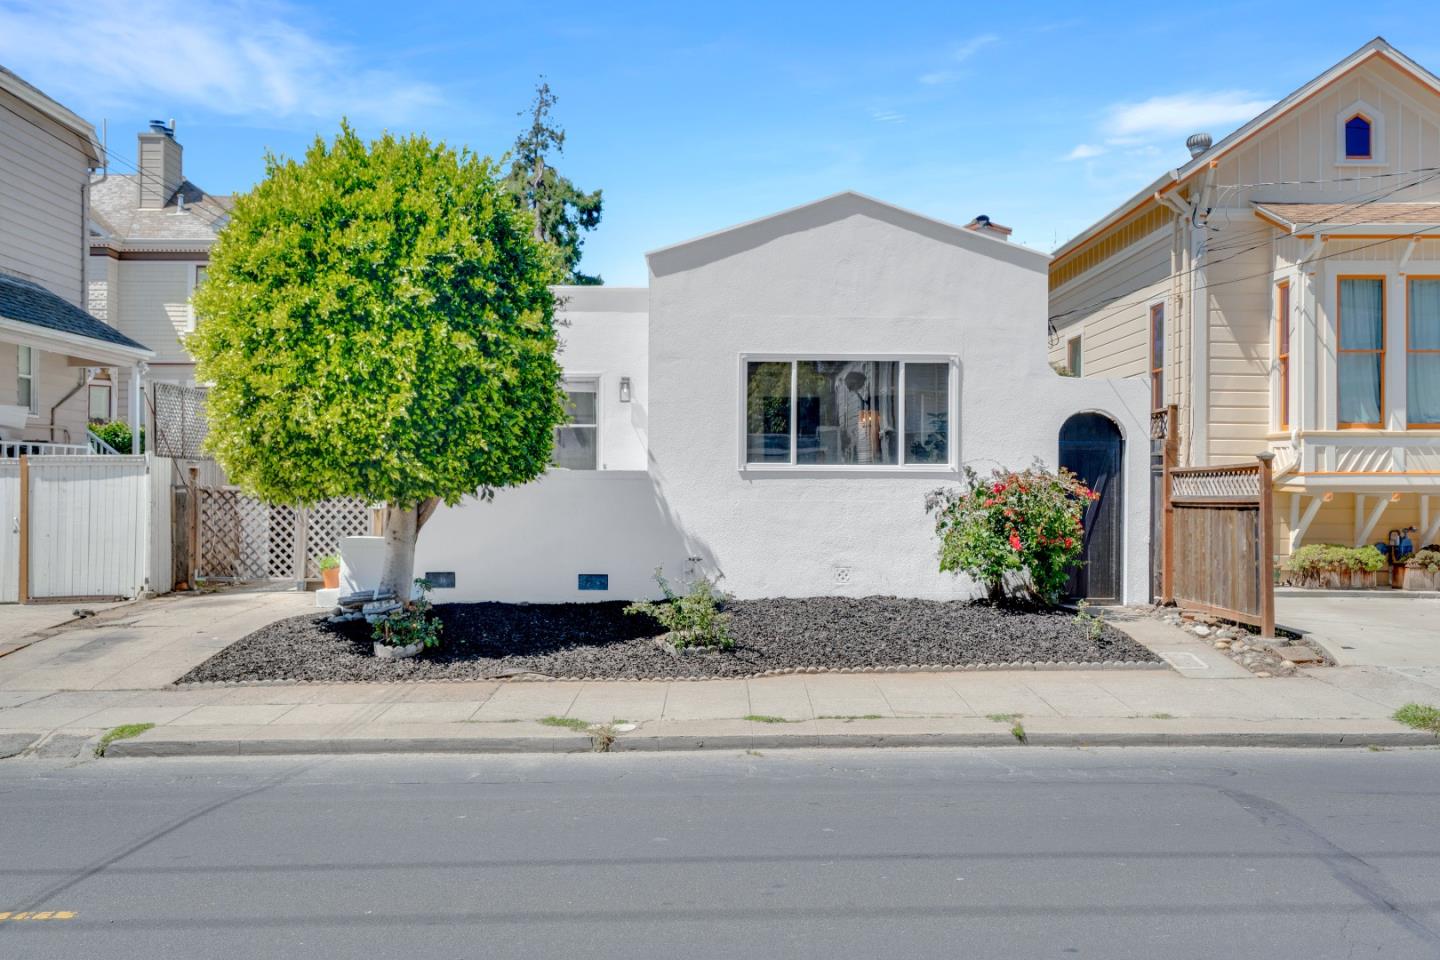 Photo of 1011 Willow St in Alameda, CA